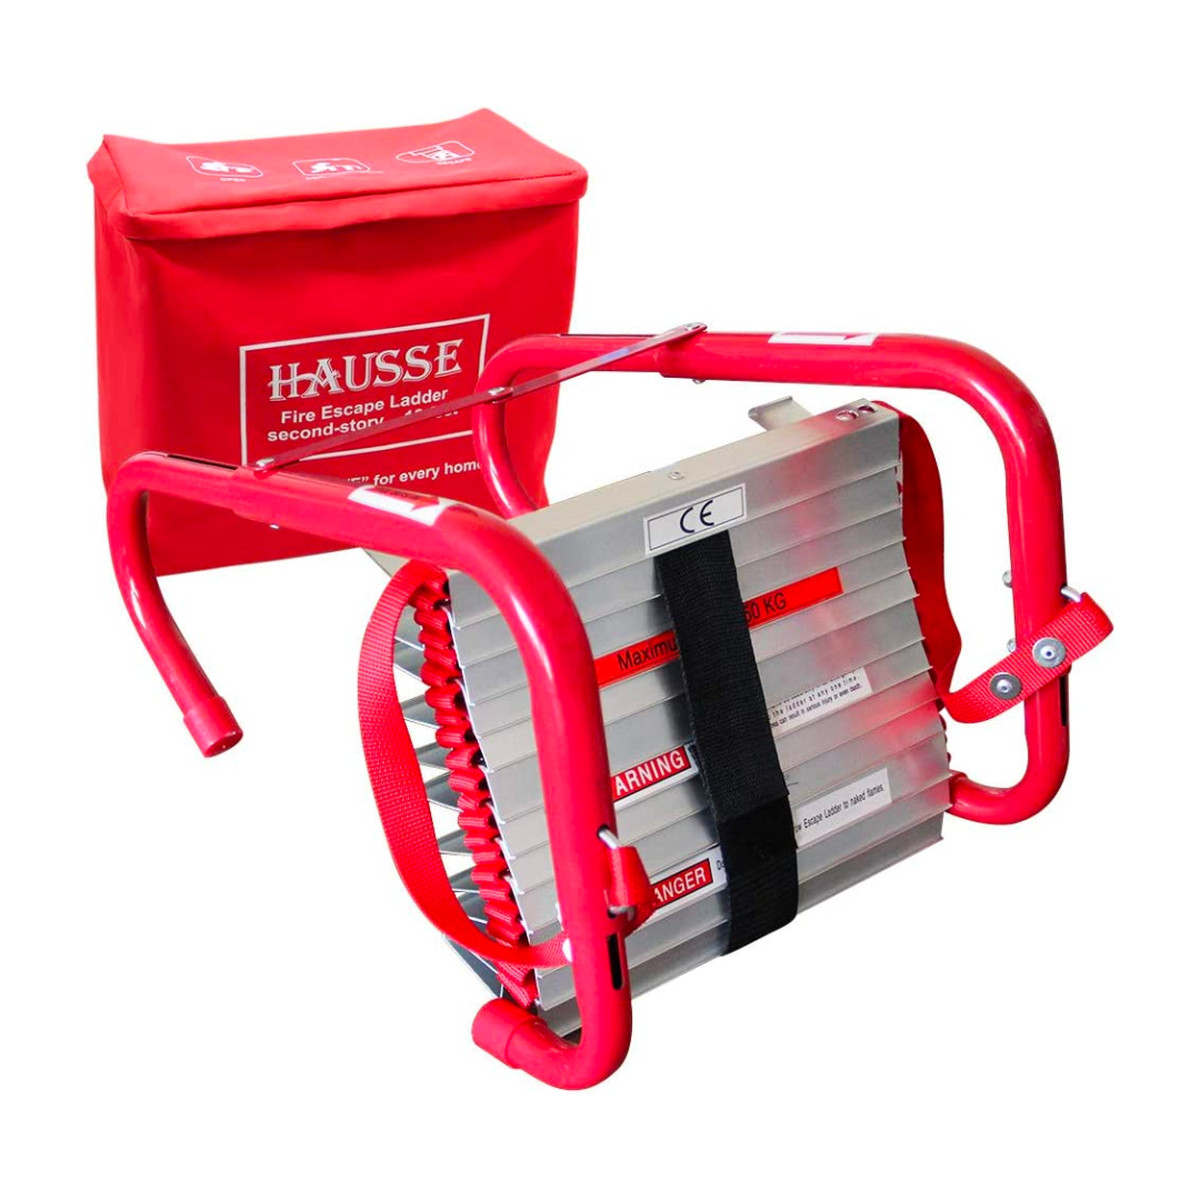 Red Hausse two-story fire escape ladder with featured storage bag